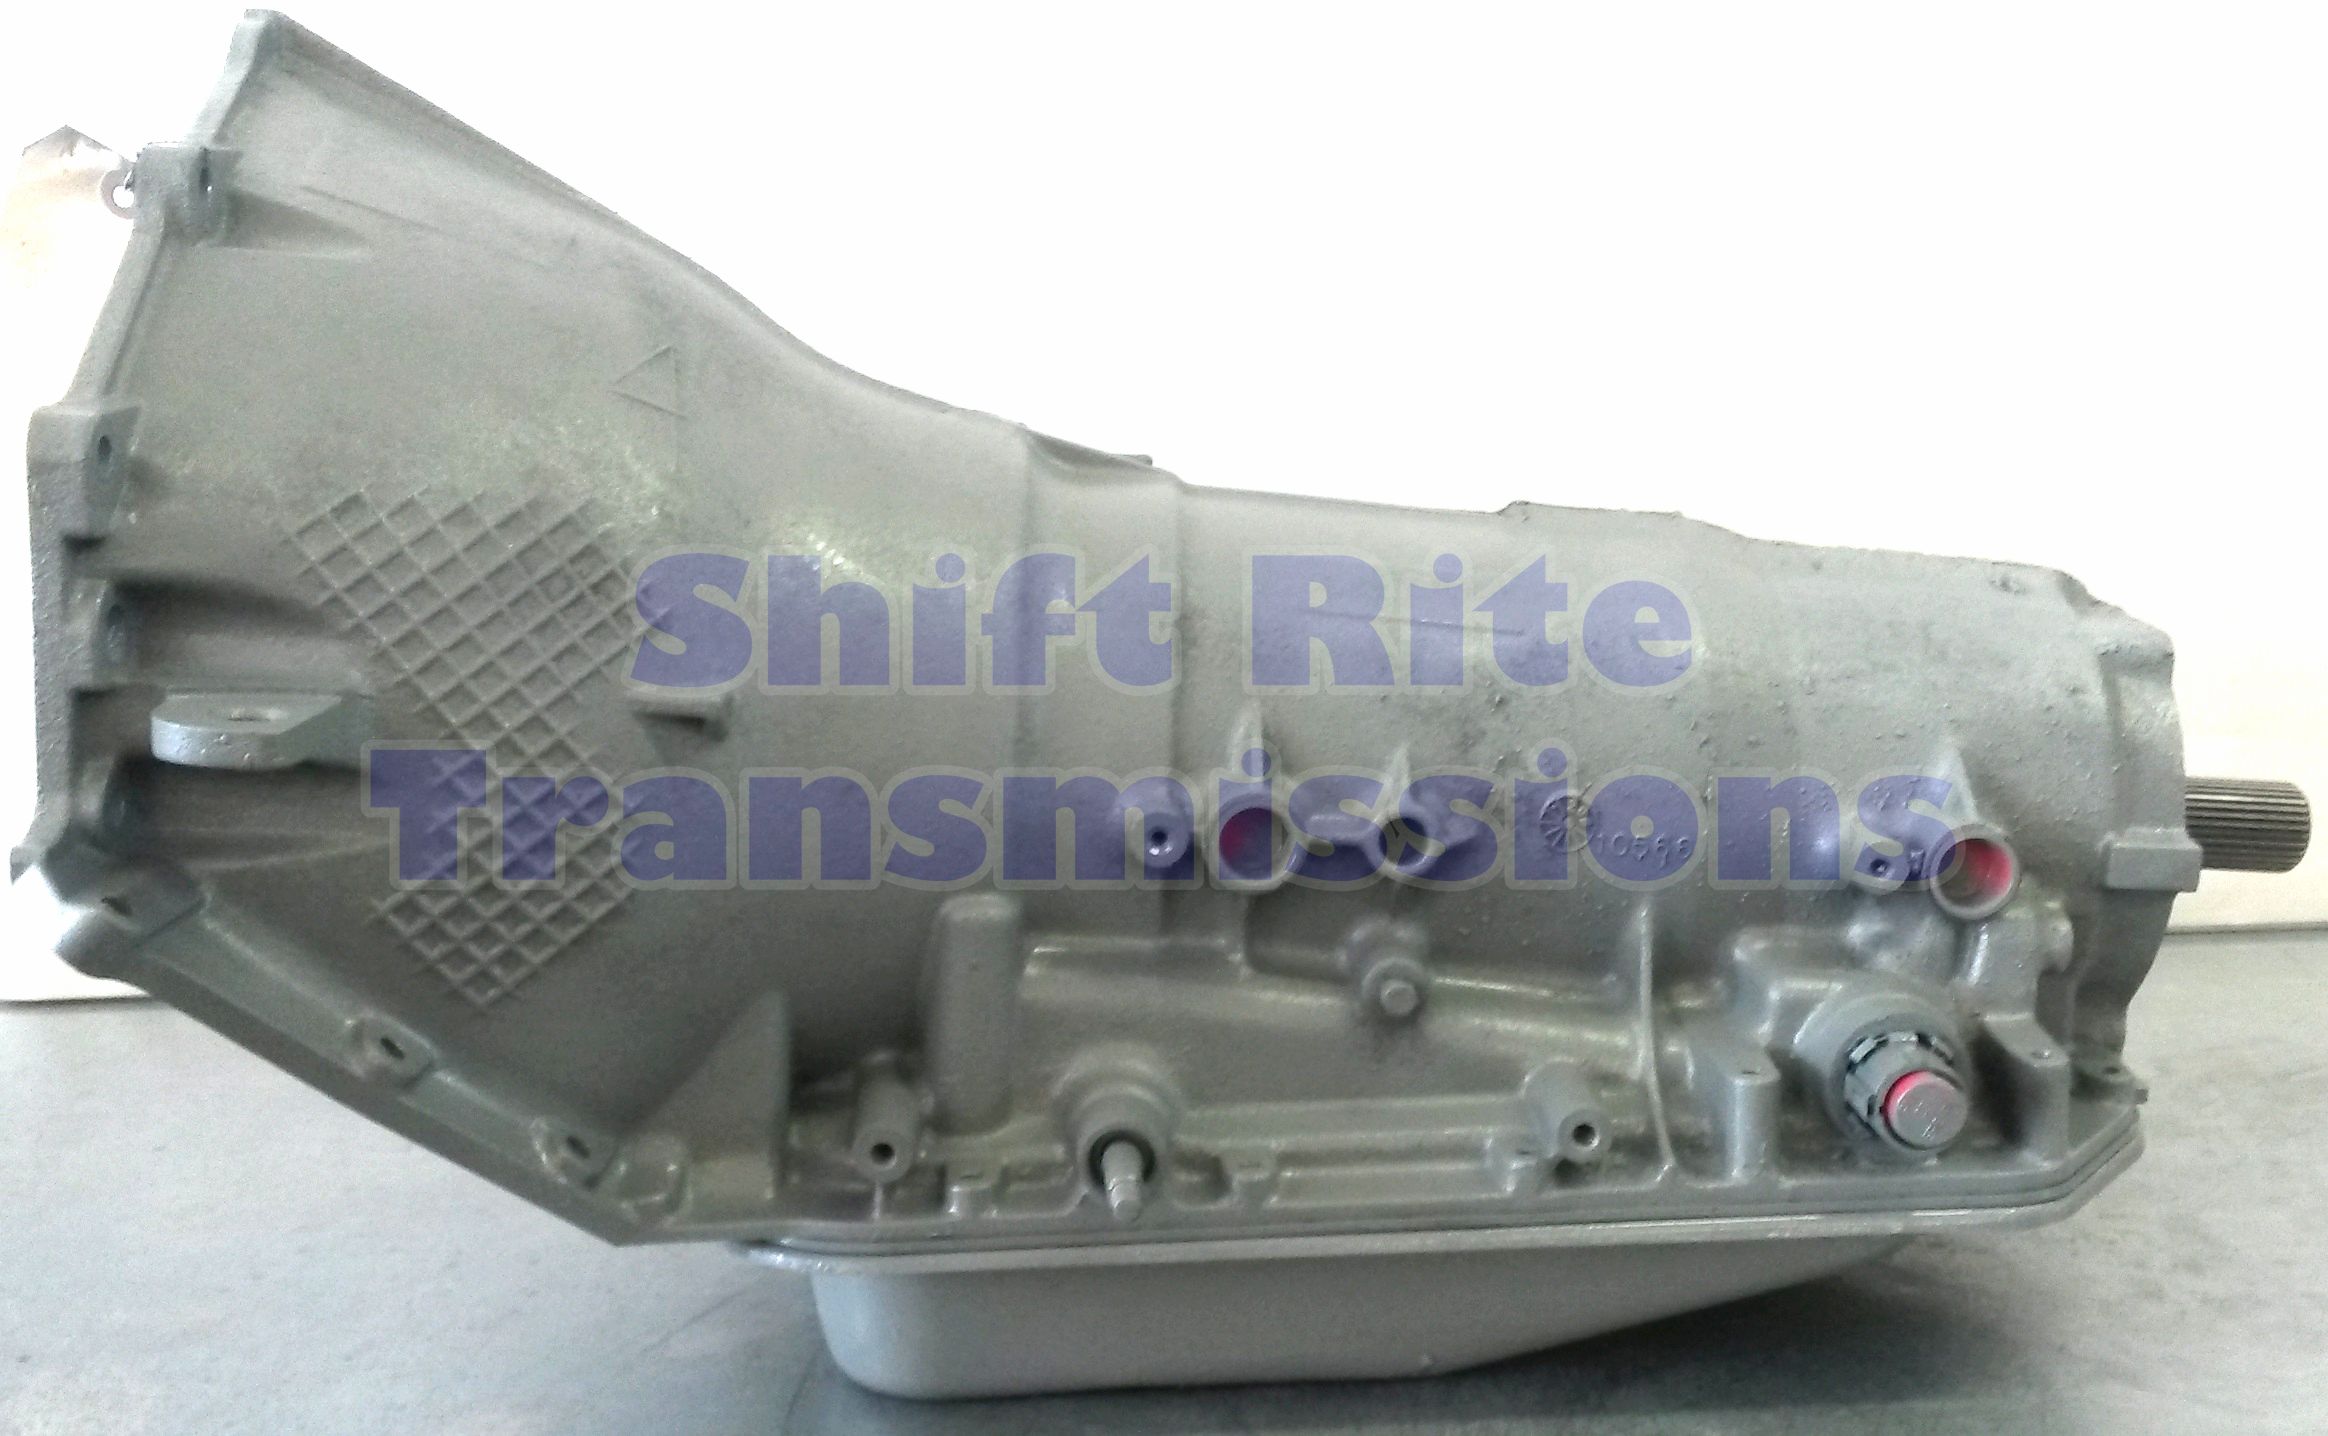 Shift Rite Transmissions replacement for 4L80E FRONT AND REAR REVERSE BAND APPLY MT1 MN8 4L85E TRANSMISSION GM Shift Rite 4L80E 